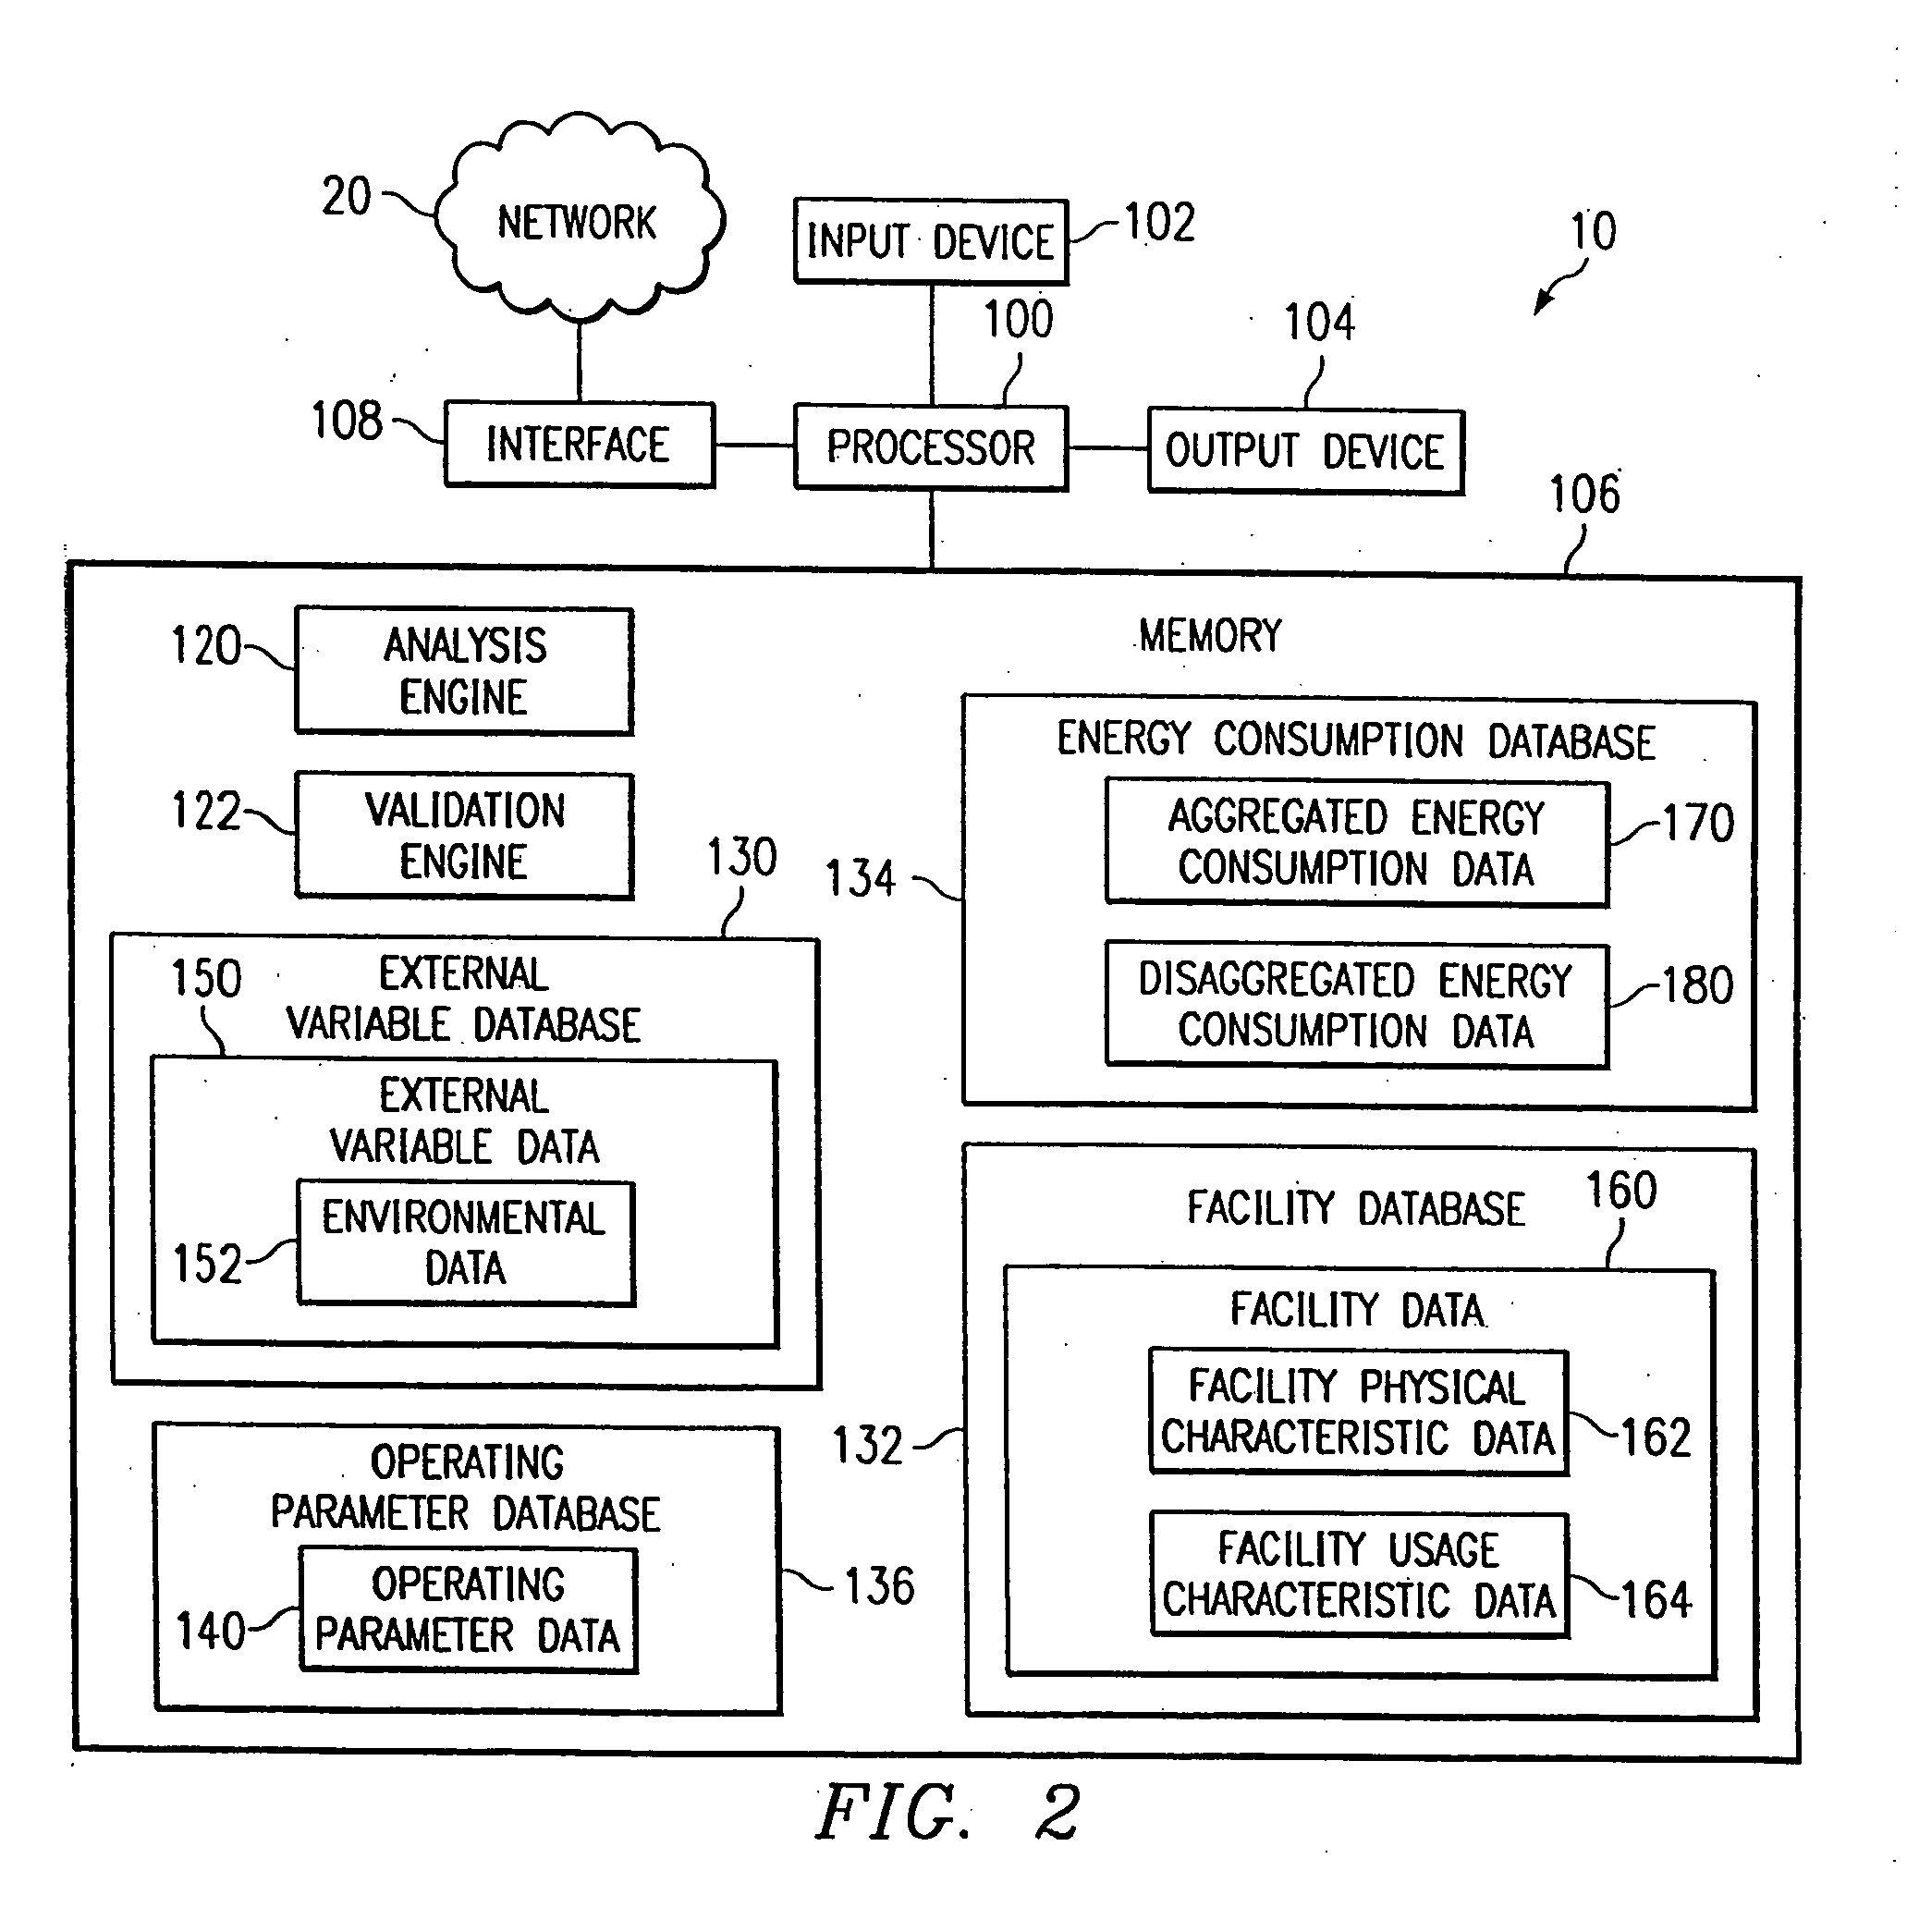 System and method for remote identification of energy consumption systems and components